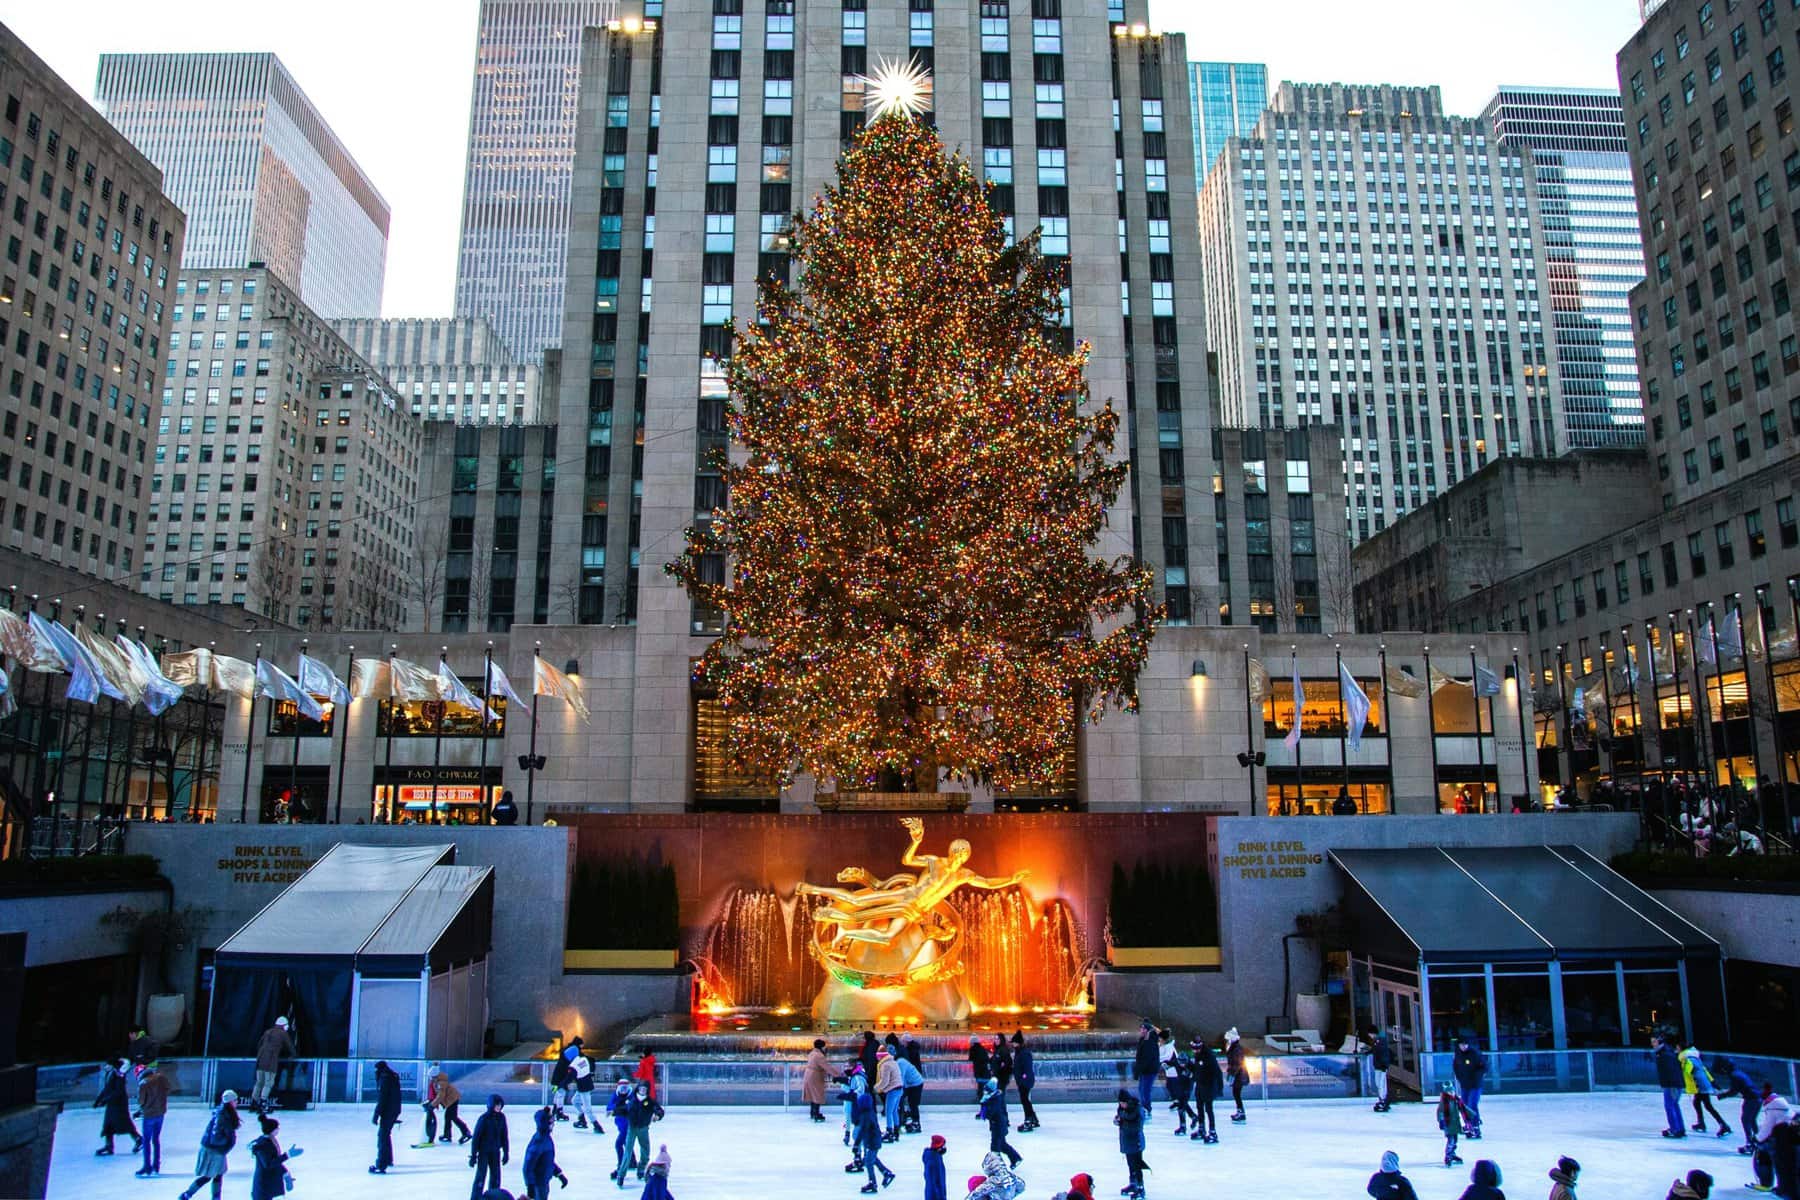 Experience the enchanting spirit of Christmas in New York City with the iconic Rockefeller Center Christmas Tree.